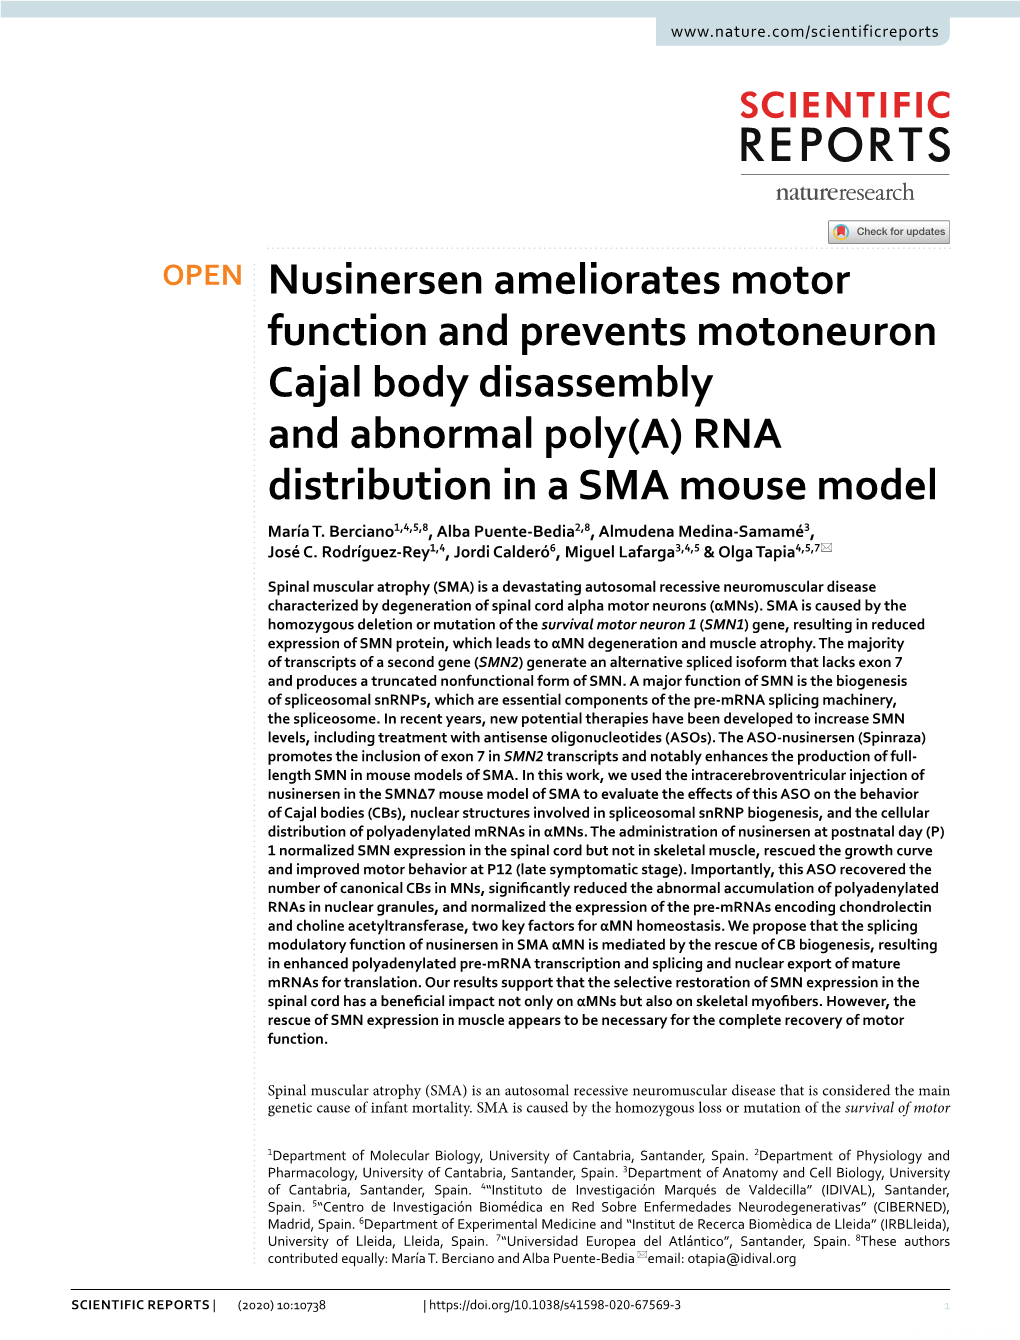 Nusinersen Ameliorates Motor Function and Prevents Motoneuron Cajal Body Disassembly and Abnormal Poly(A) RNA Distribution in a SMA Mouse Model María T